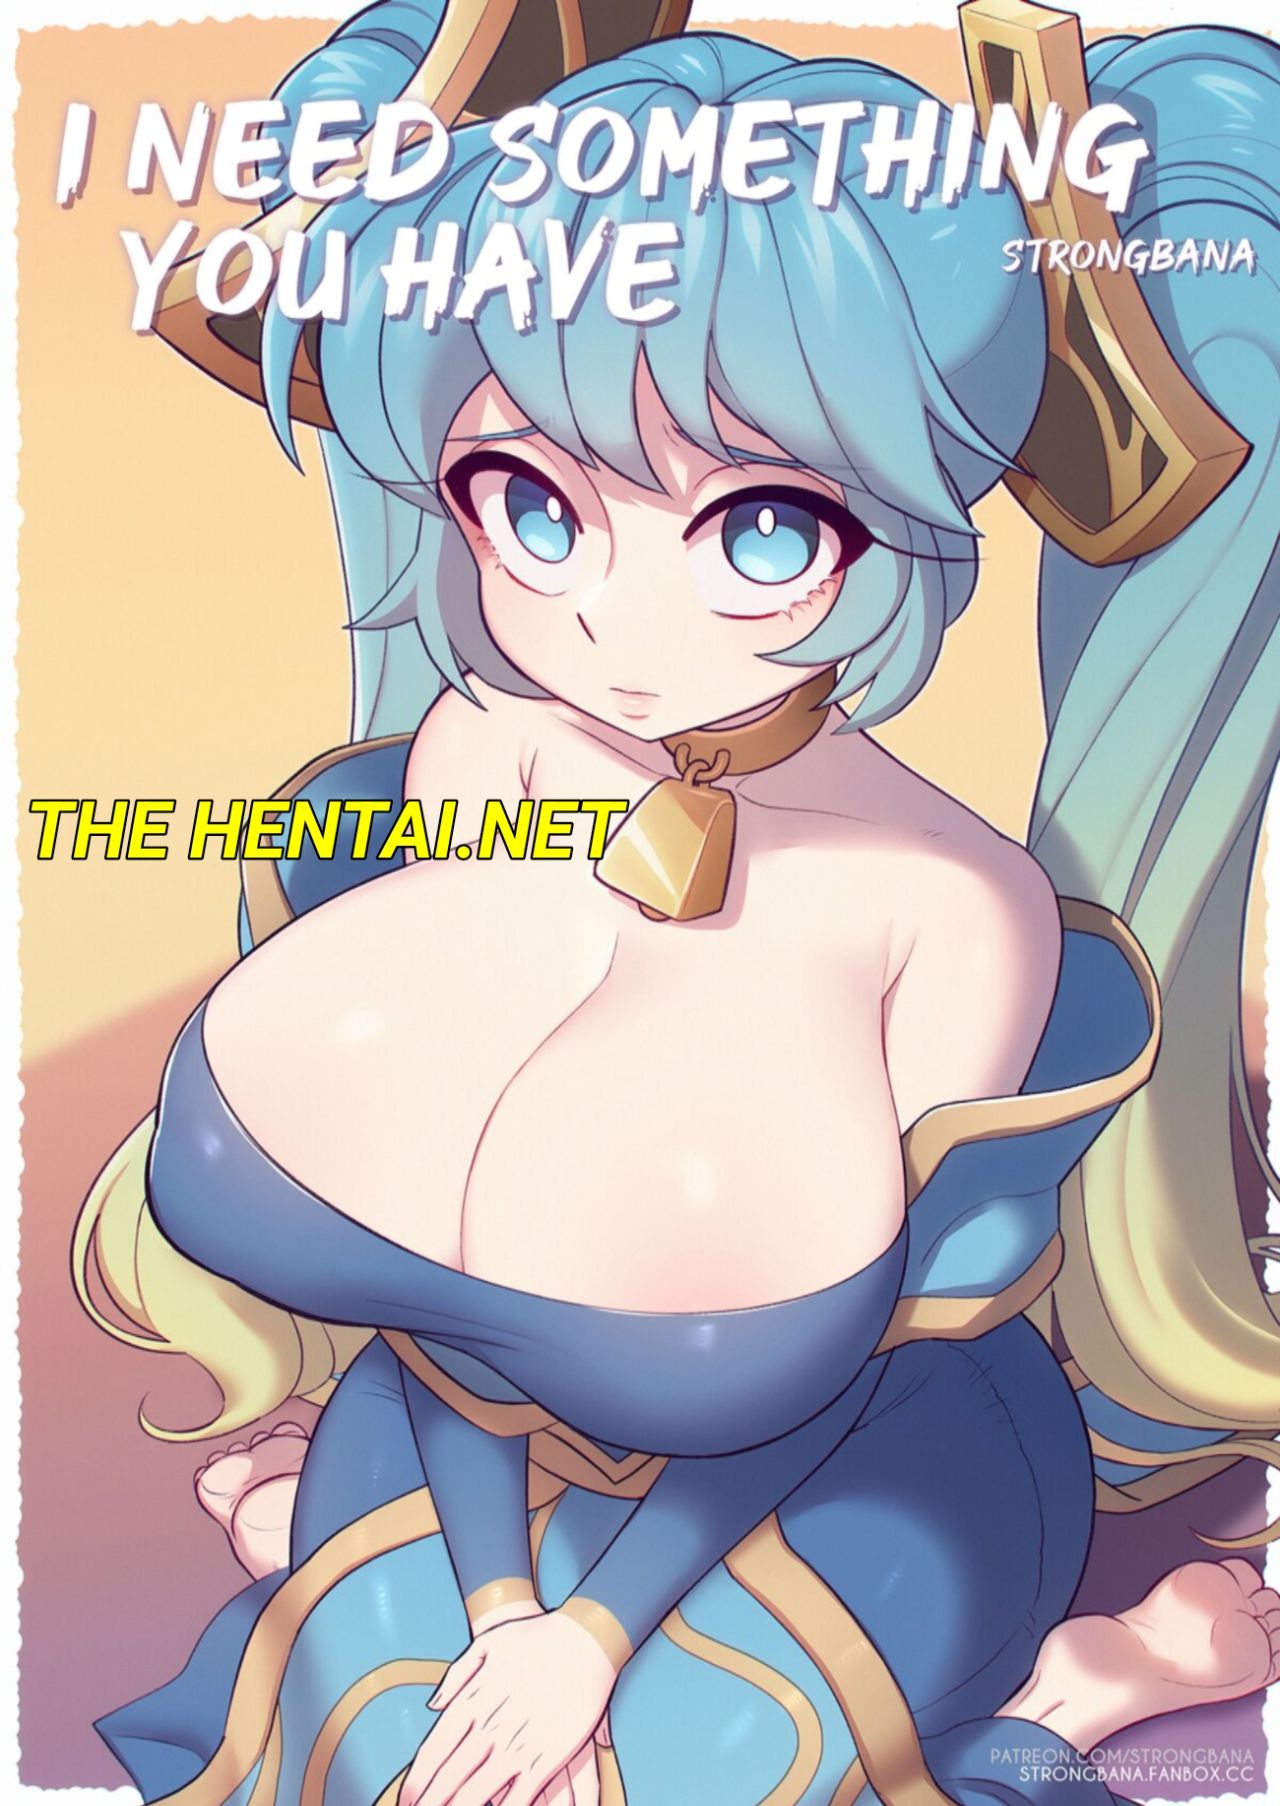 II NEED SOMETHING YOU HAVE Hentai pt-br 01